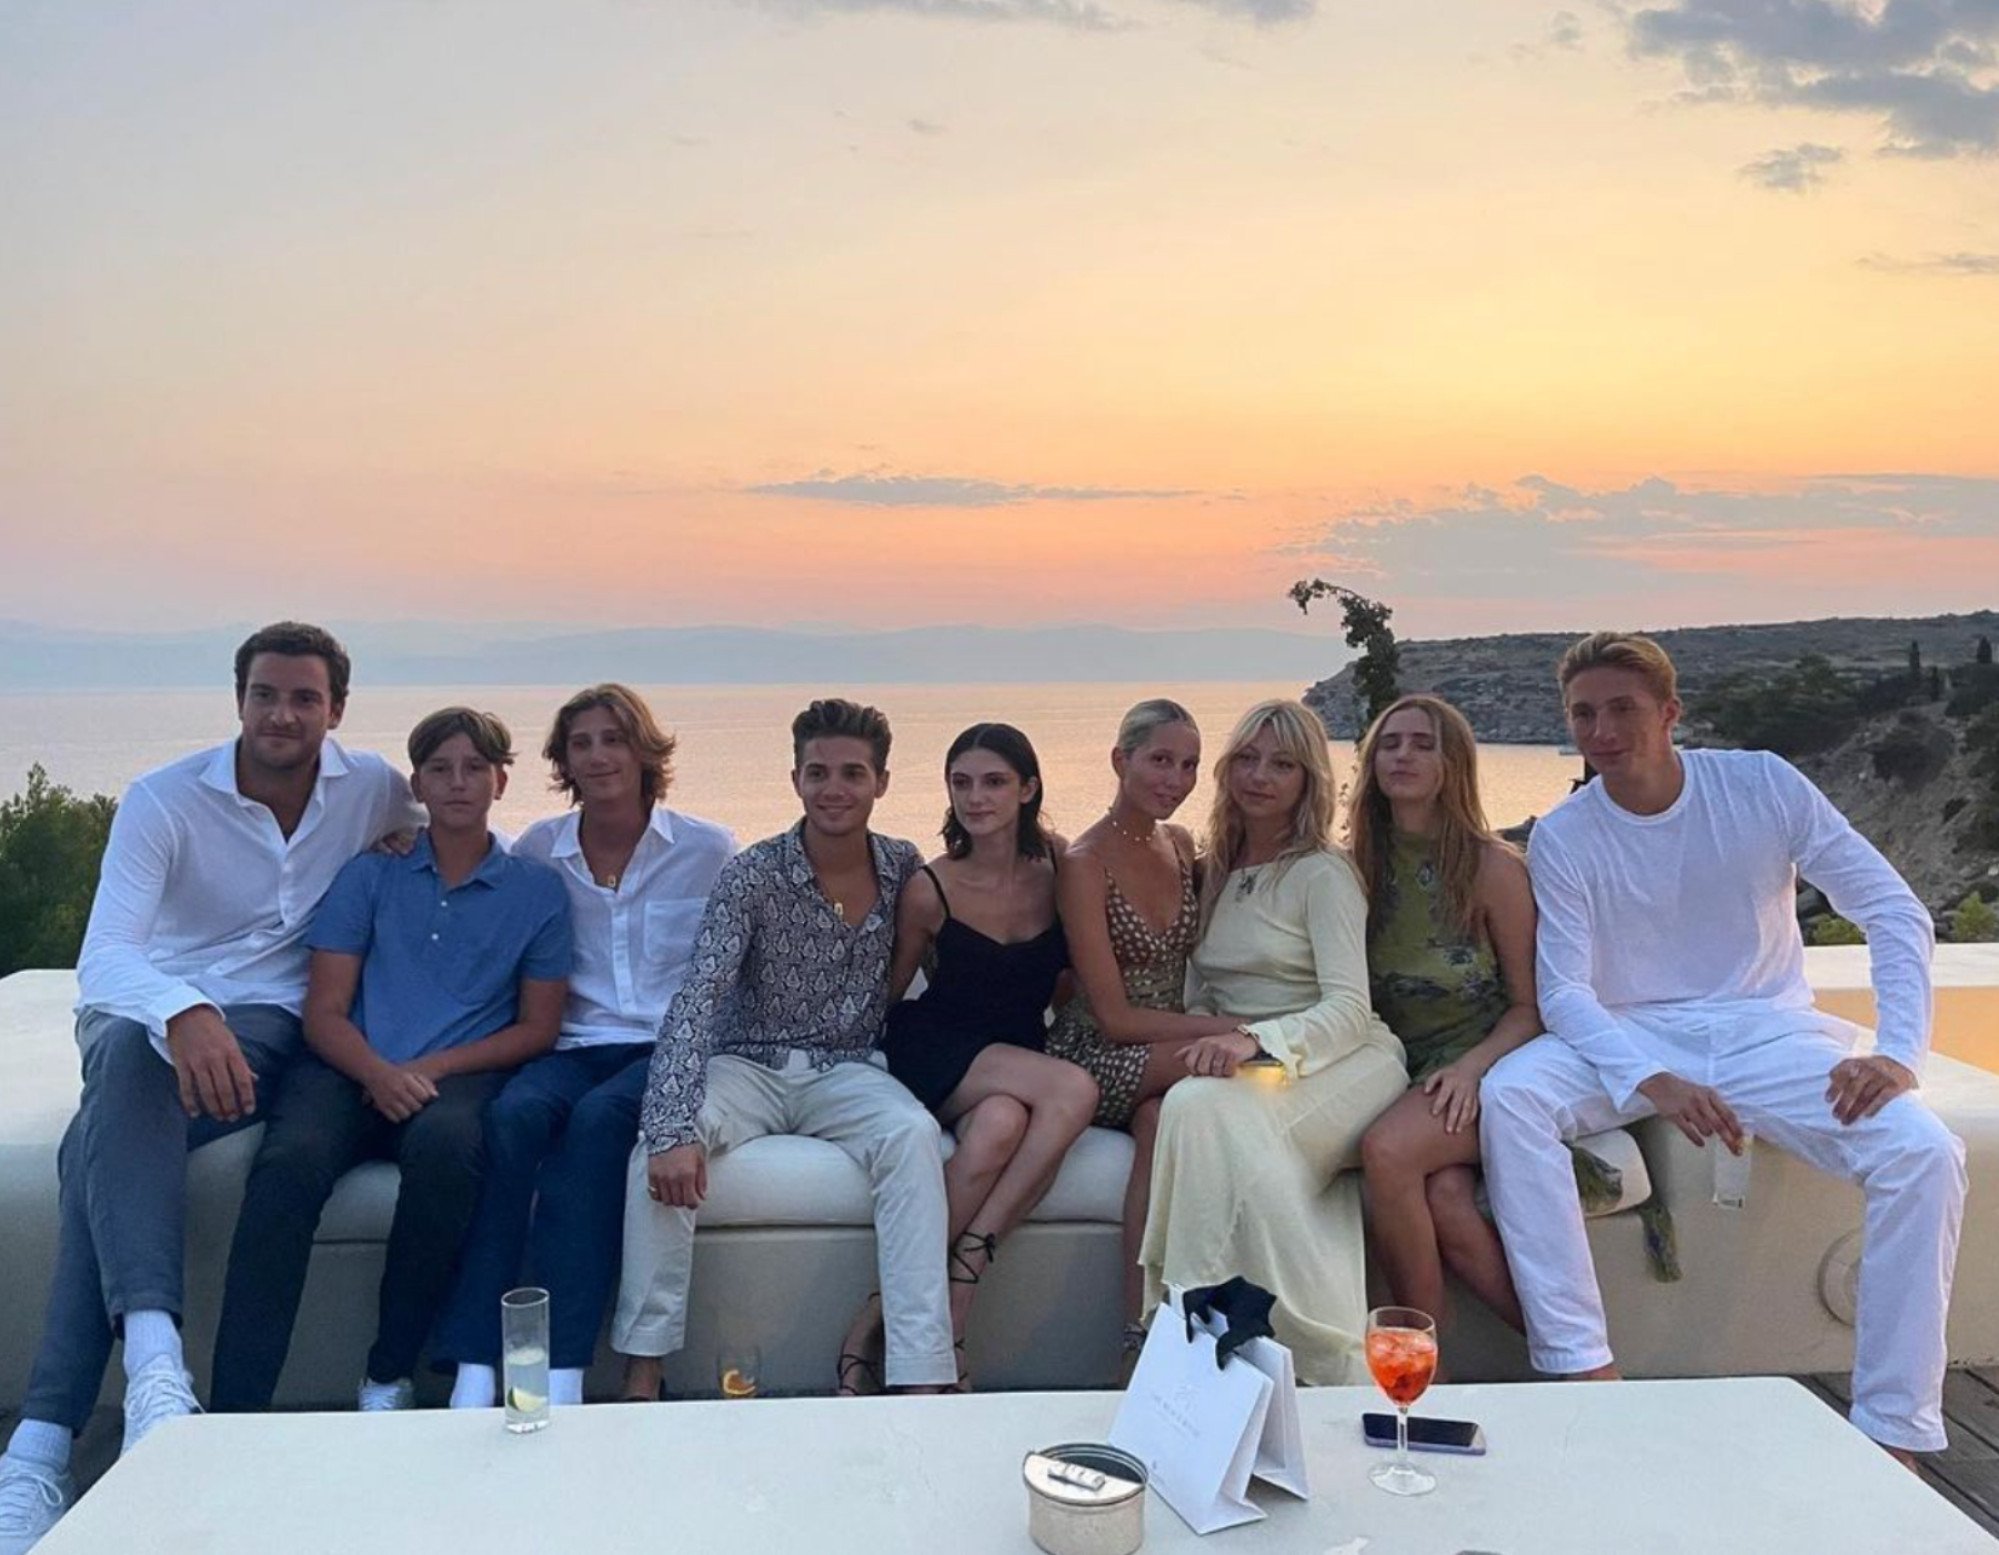 Isabella Massenet and Prince Achileas-Andreas of Greece and Denmark, with the royal’s family. Photo: @mariechantal22/Instagram